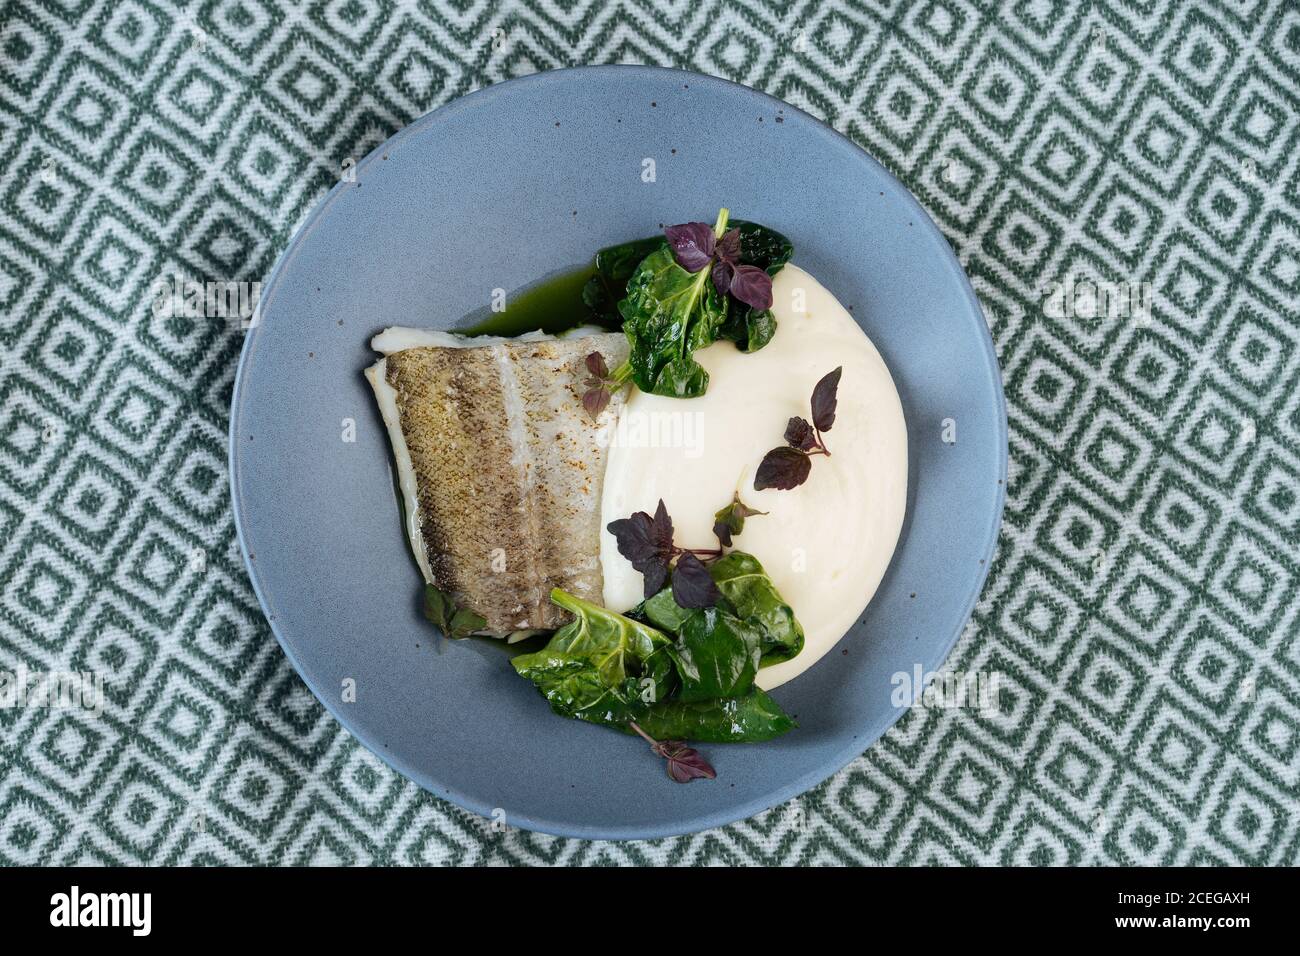 Flat lay of blue plate with fish fillet and sauce with green in Nordic style served on fabric Stock Photo